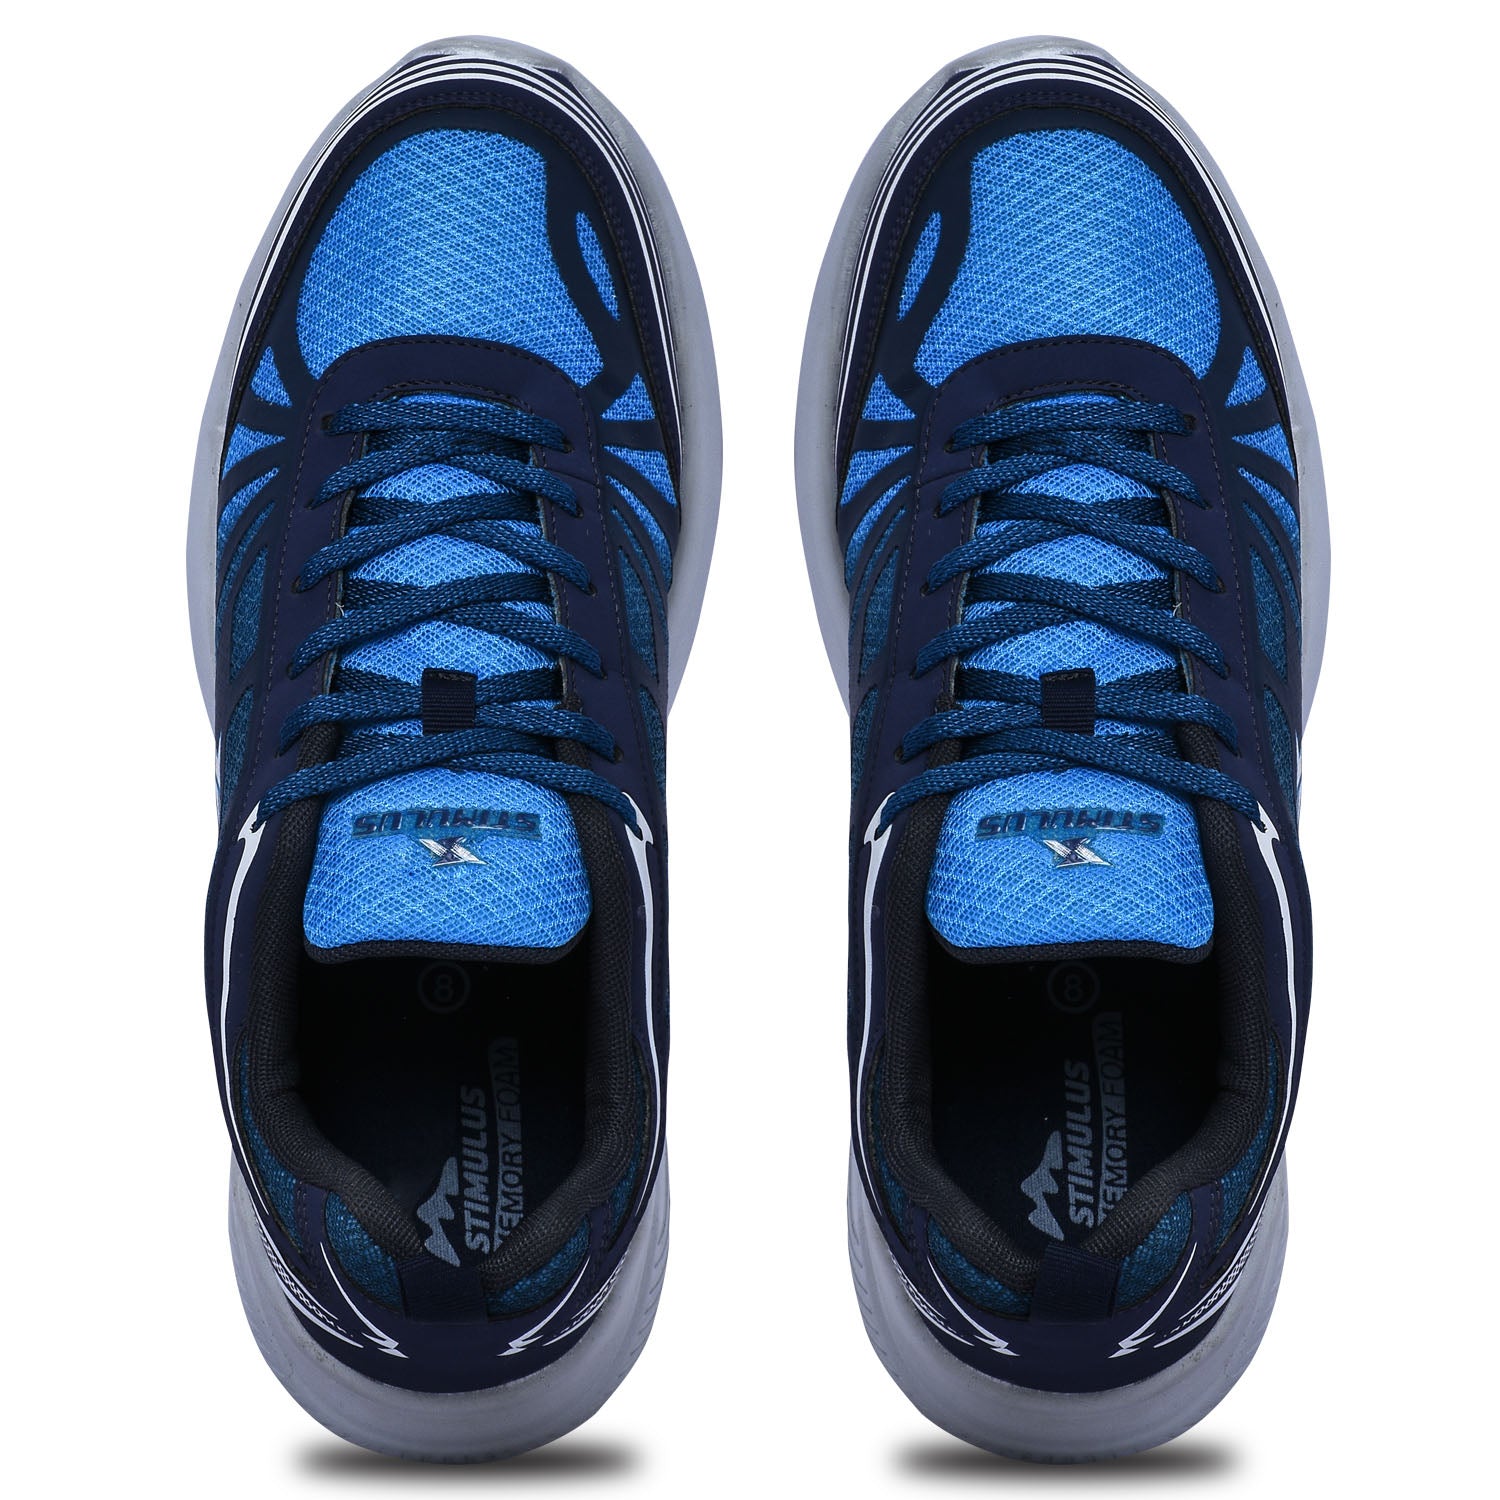 Paragon K1214G Men Casual Shoes | Stylish Walking Outdoor Shoes for Everyday Wear | Smart &amp; Trendy Design  | Comfortable Cushioned Soles Blue